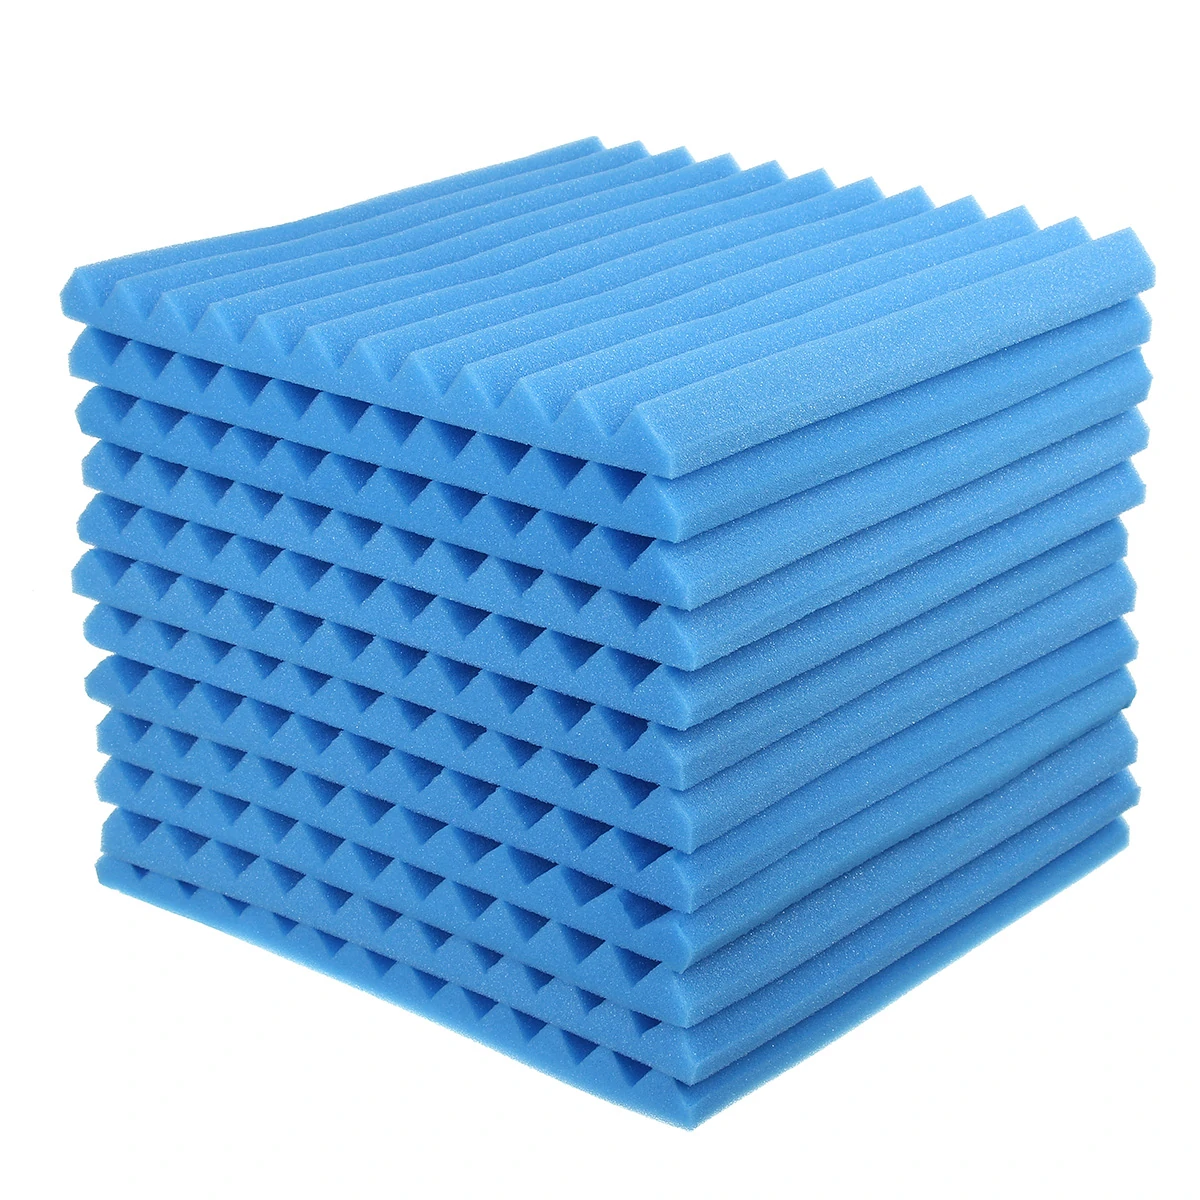 Find 24Pcs Acoustic Panels Tiles Studio Soundproofing Insulation Closed Cell Foam for Sale on Gipsybee.com